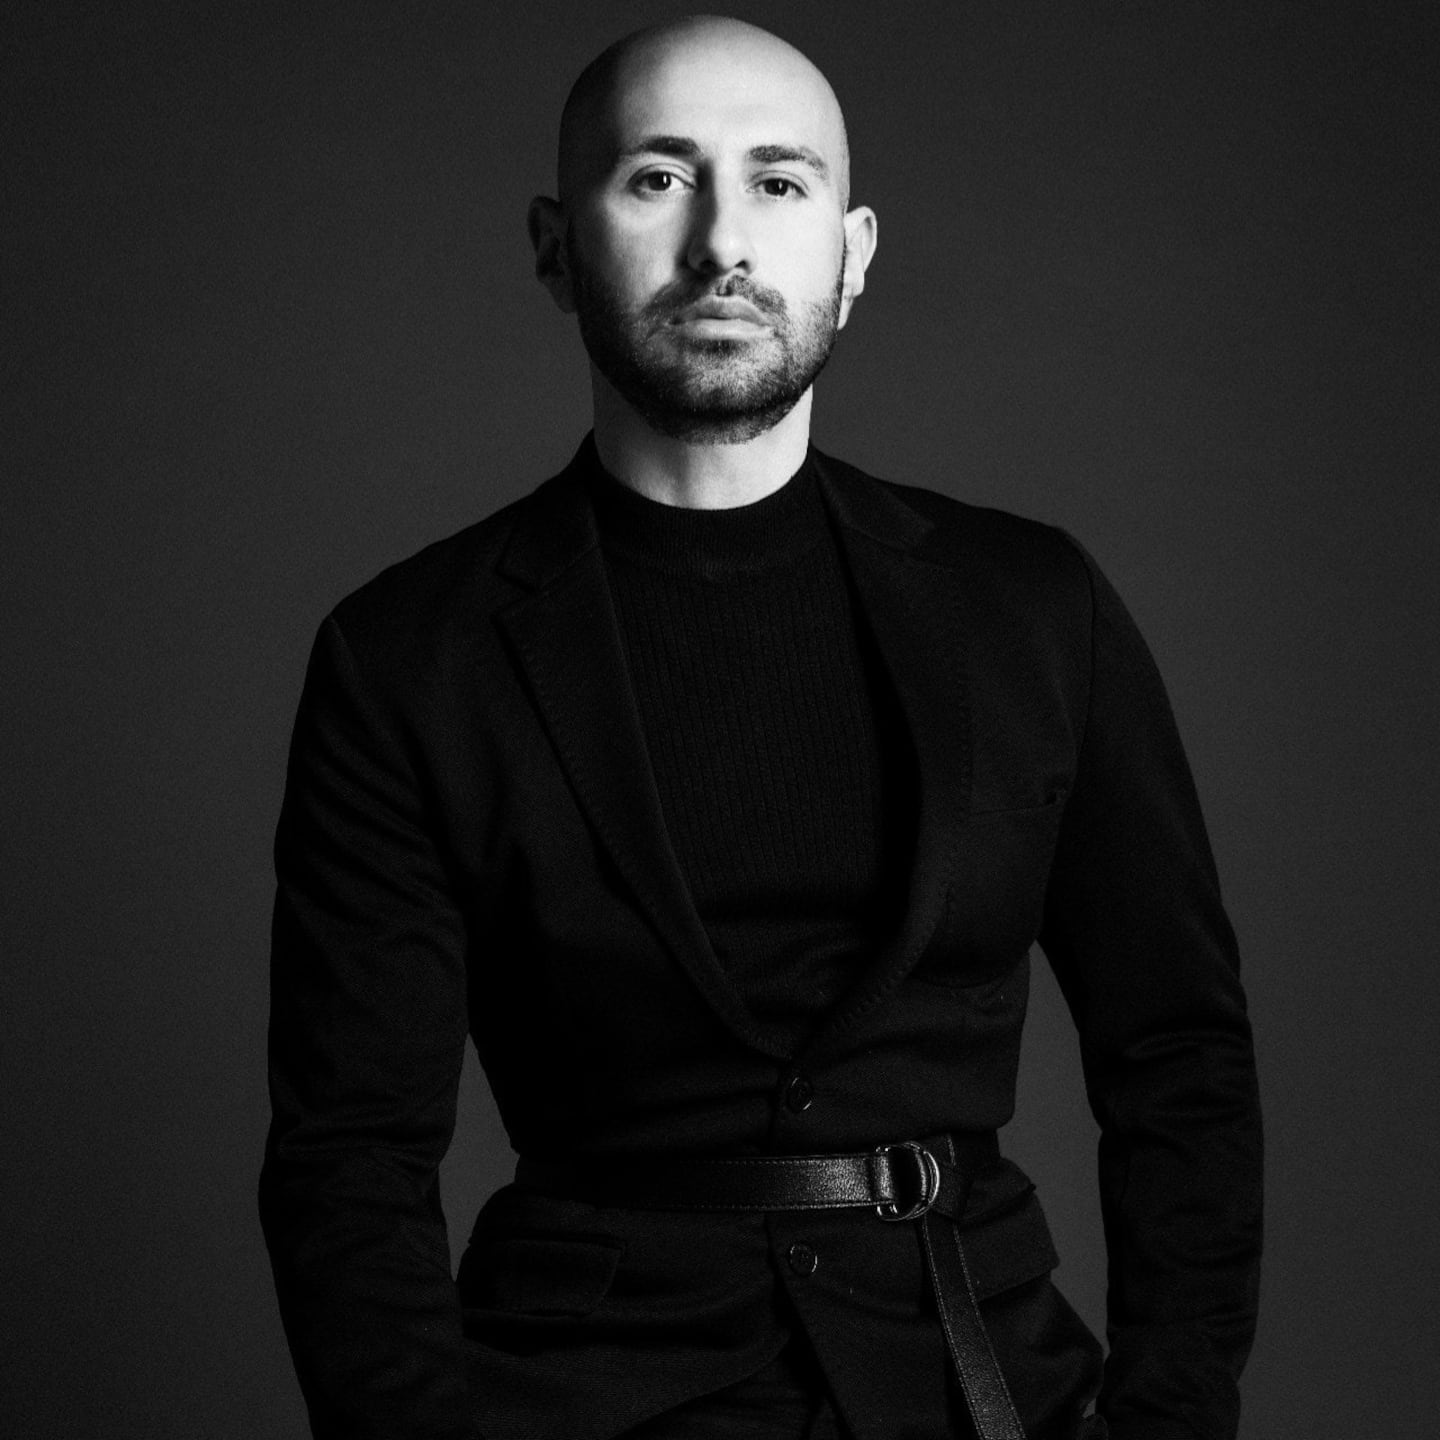 Vogue Adria will be launched by Condé Nast and Media 3.0 Publishing, which was co-founded by Sonja Kovacs, Nenad Janjatovic (pictured here) and Milan Djacic.